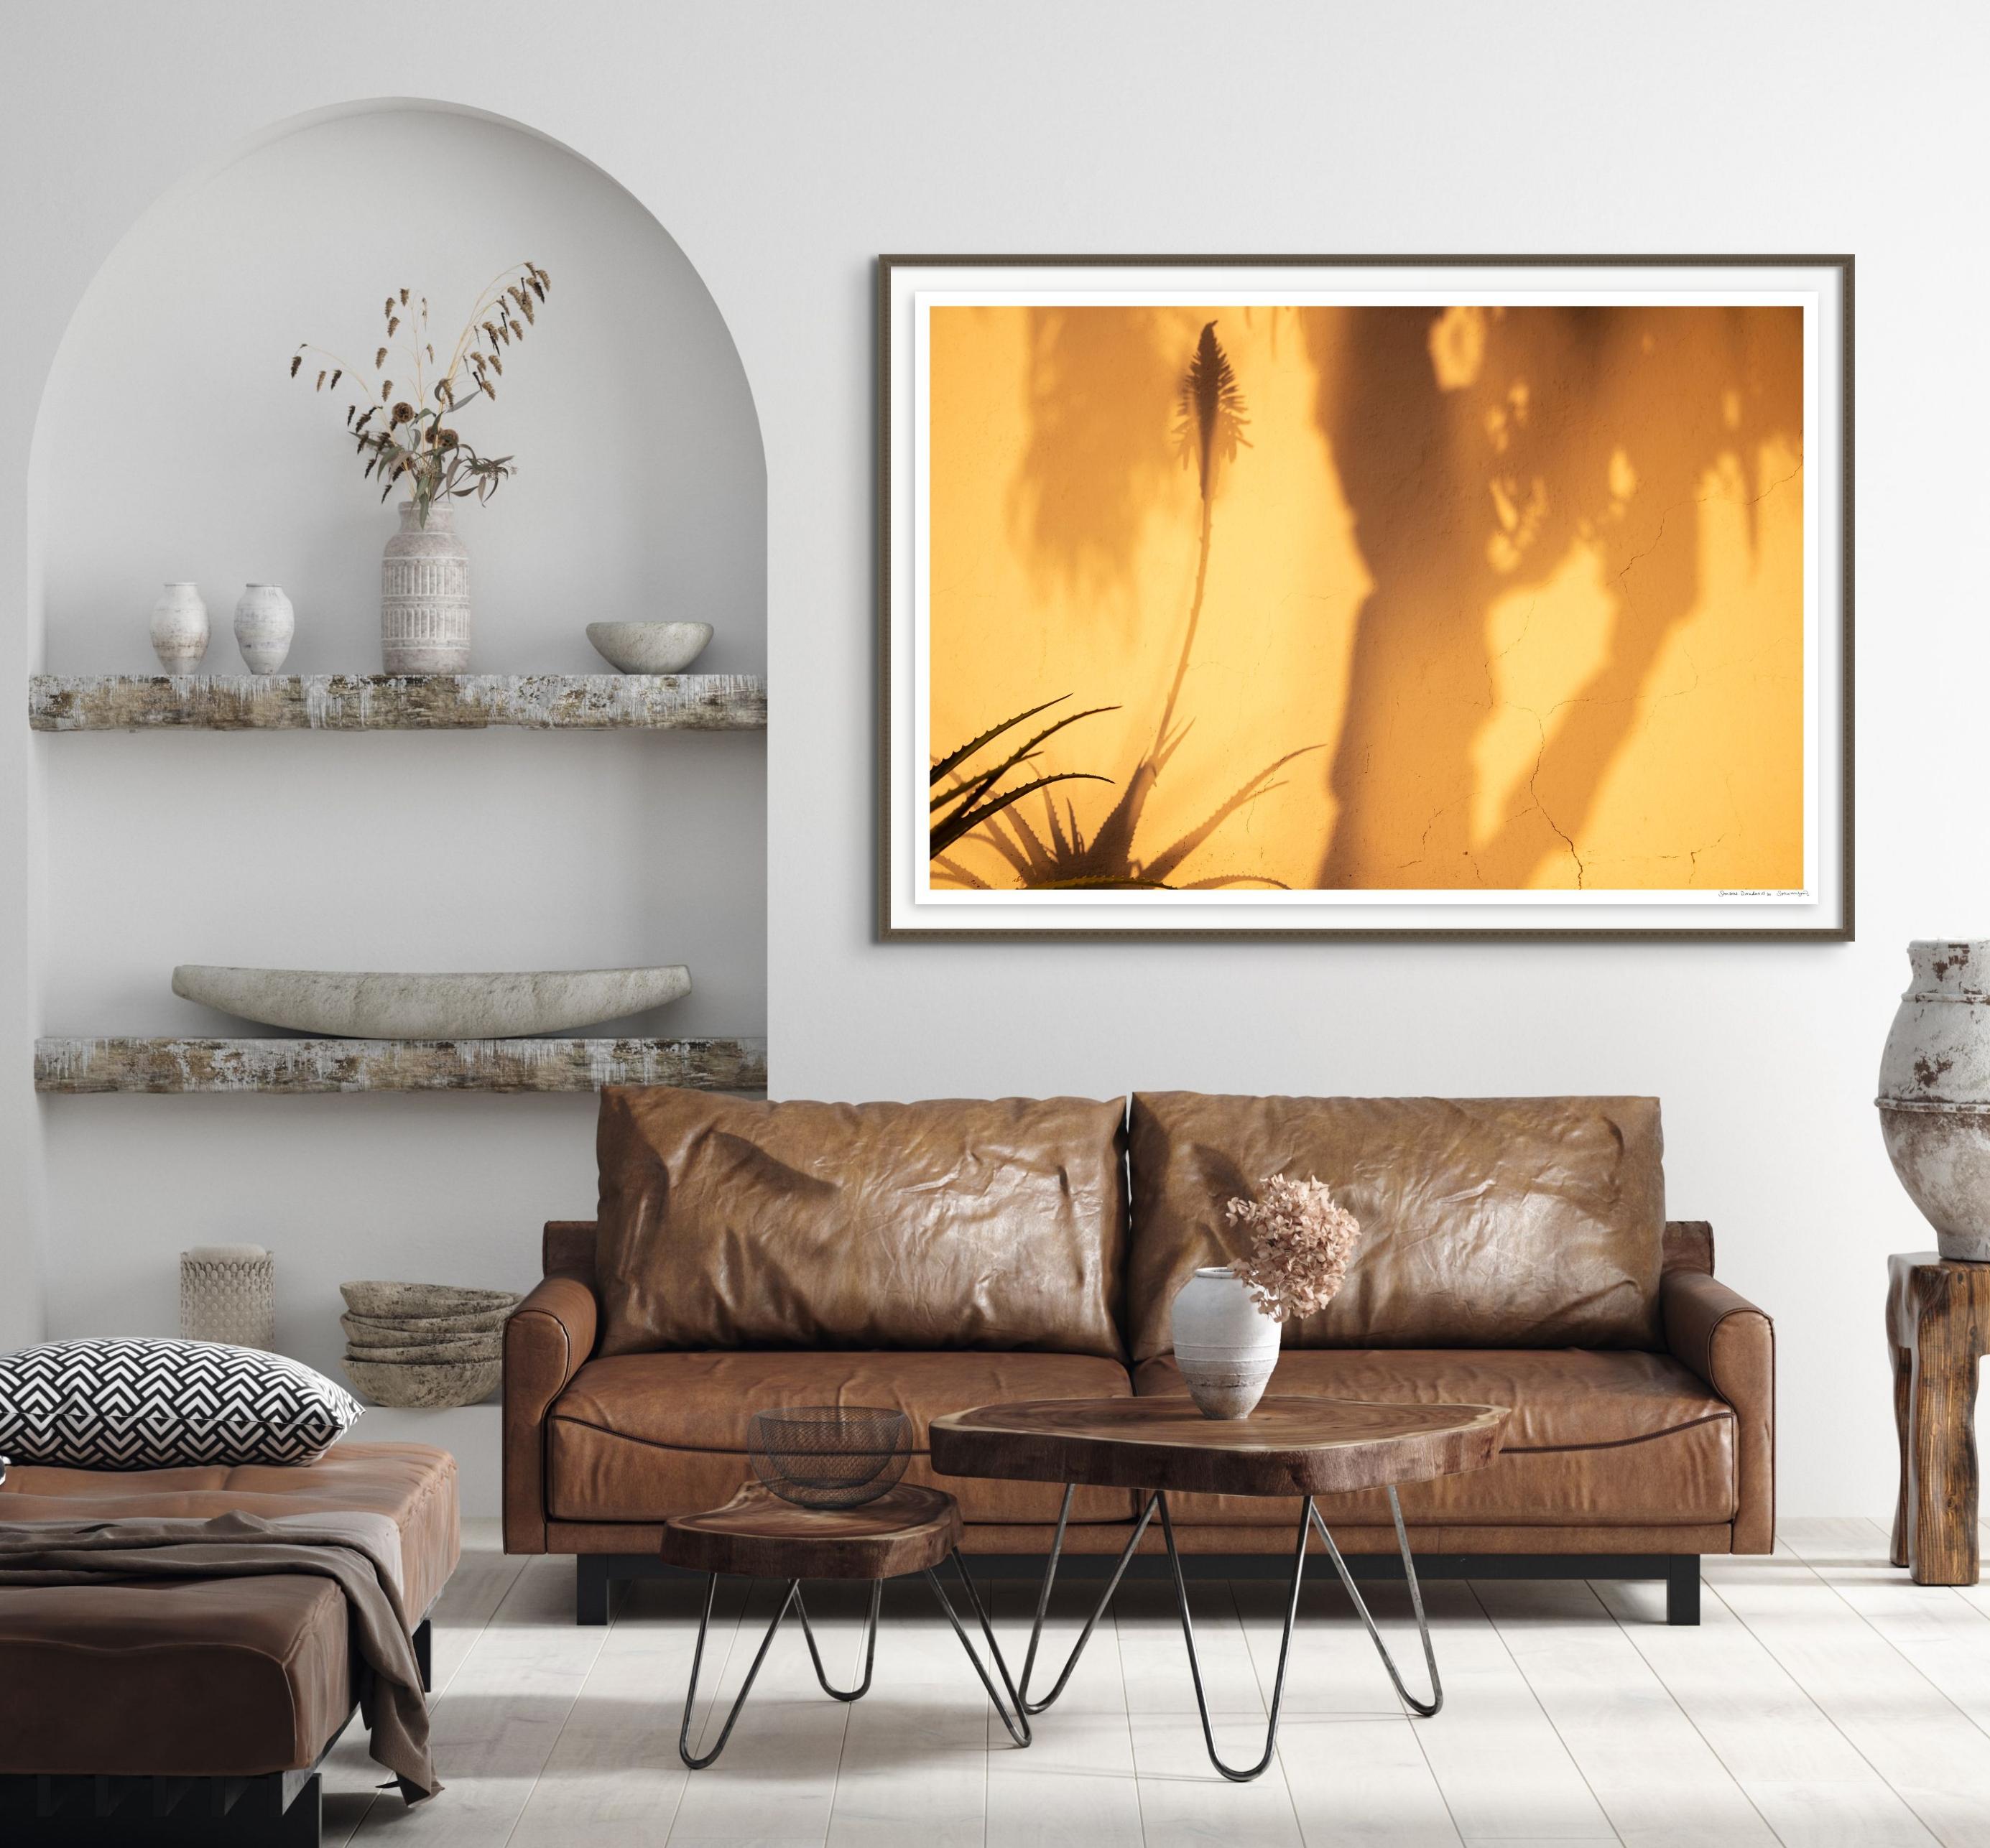 'Sombras Doradas (2)'
Limited edition archival photograph. Unframed, hand signed and numbered
_________________
Shadows painted on the finca wall: low December sun, golden, luminous, casting soft silhouettes through the aperture of the Eucalyptus